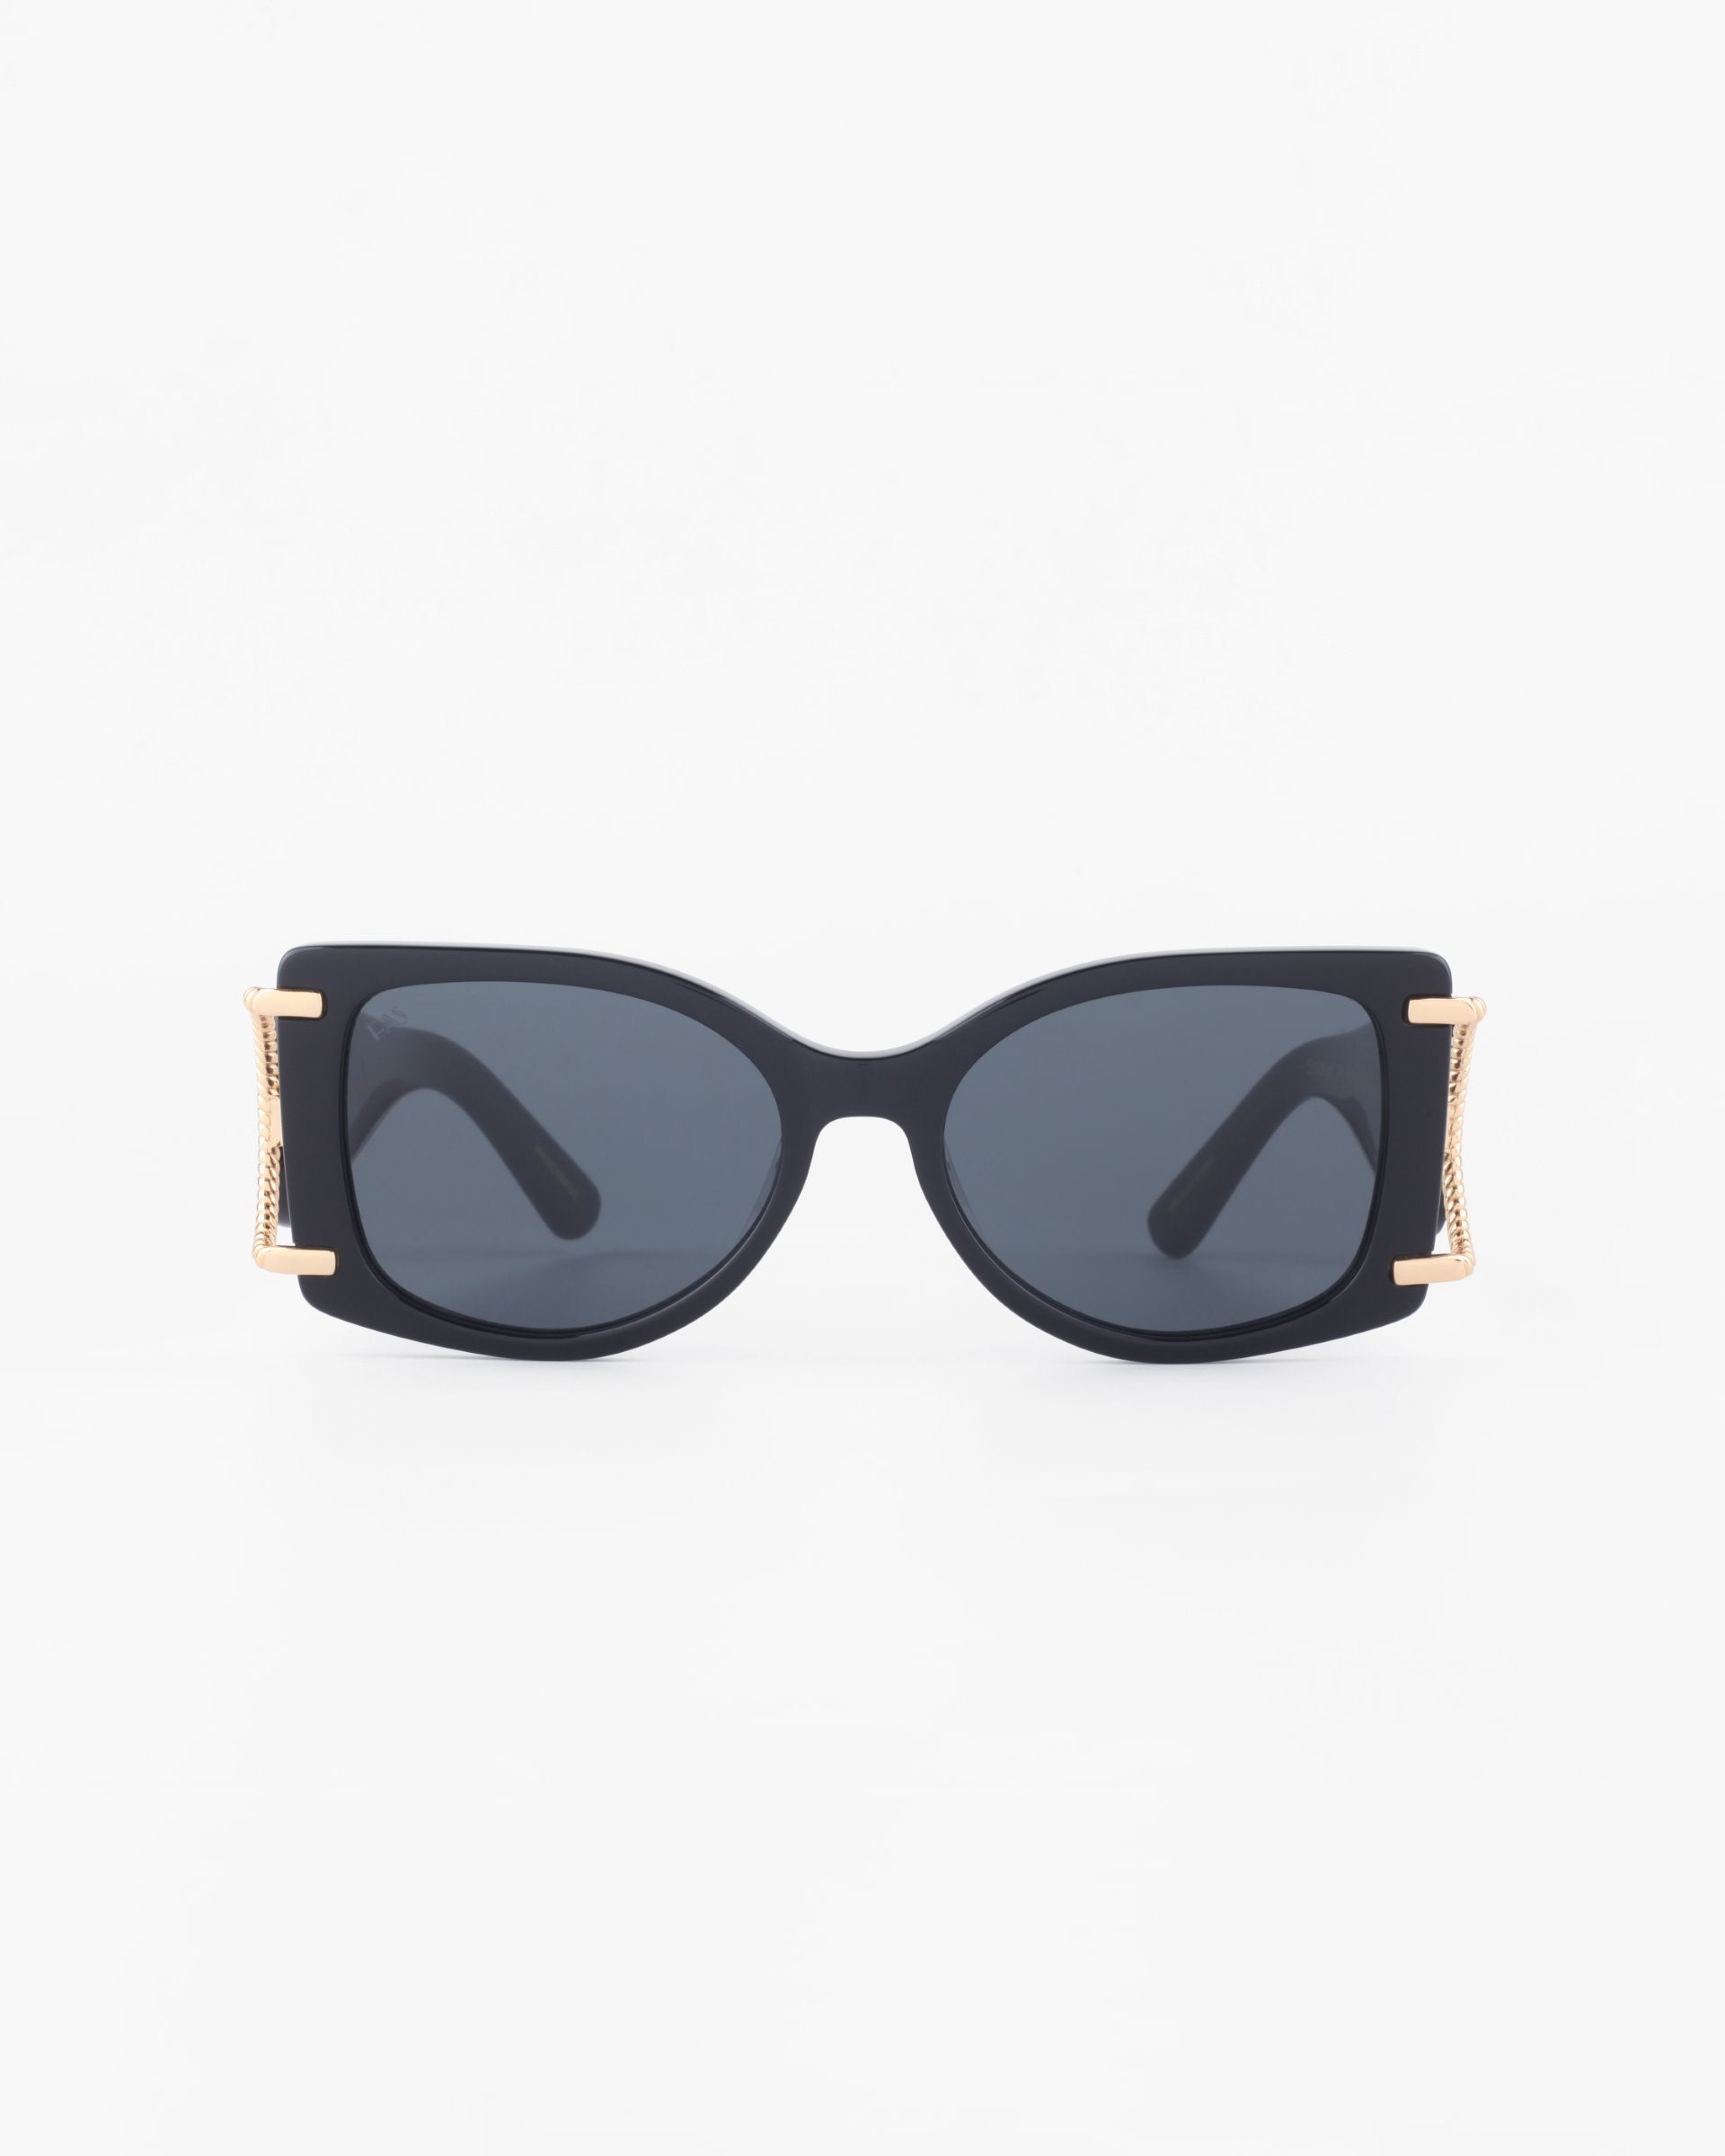 A pair of black rectangular acetate Sculpture sunglasses by For Art&#39;s Sake® with dark lenses. The frame features 18-karat gold-plated accents on the sides near the temples, adding an elegant touch. With 100% UVA &amp; UVB protection, these stylish sunglasses stand out against a plain white backdrop.